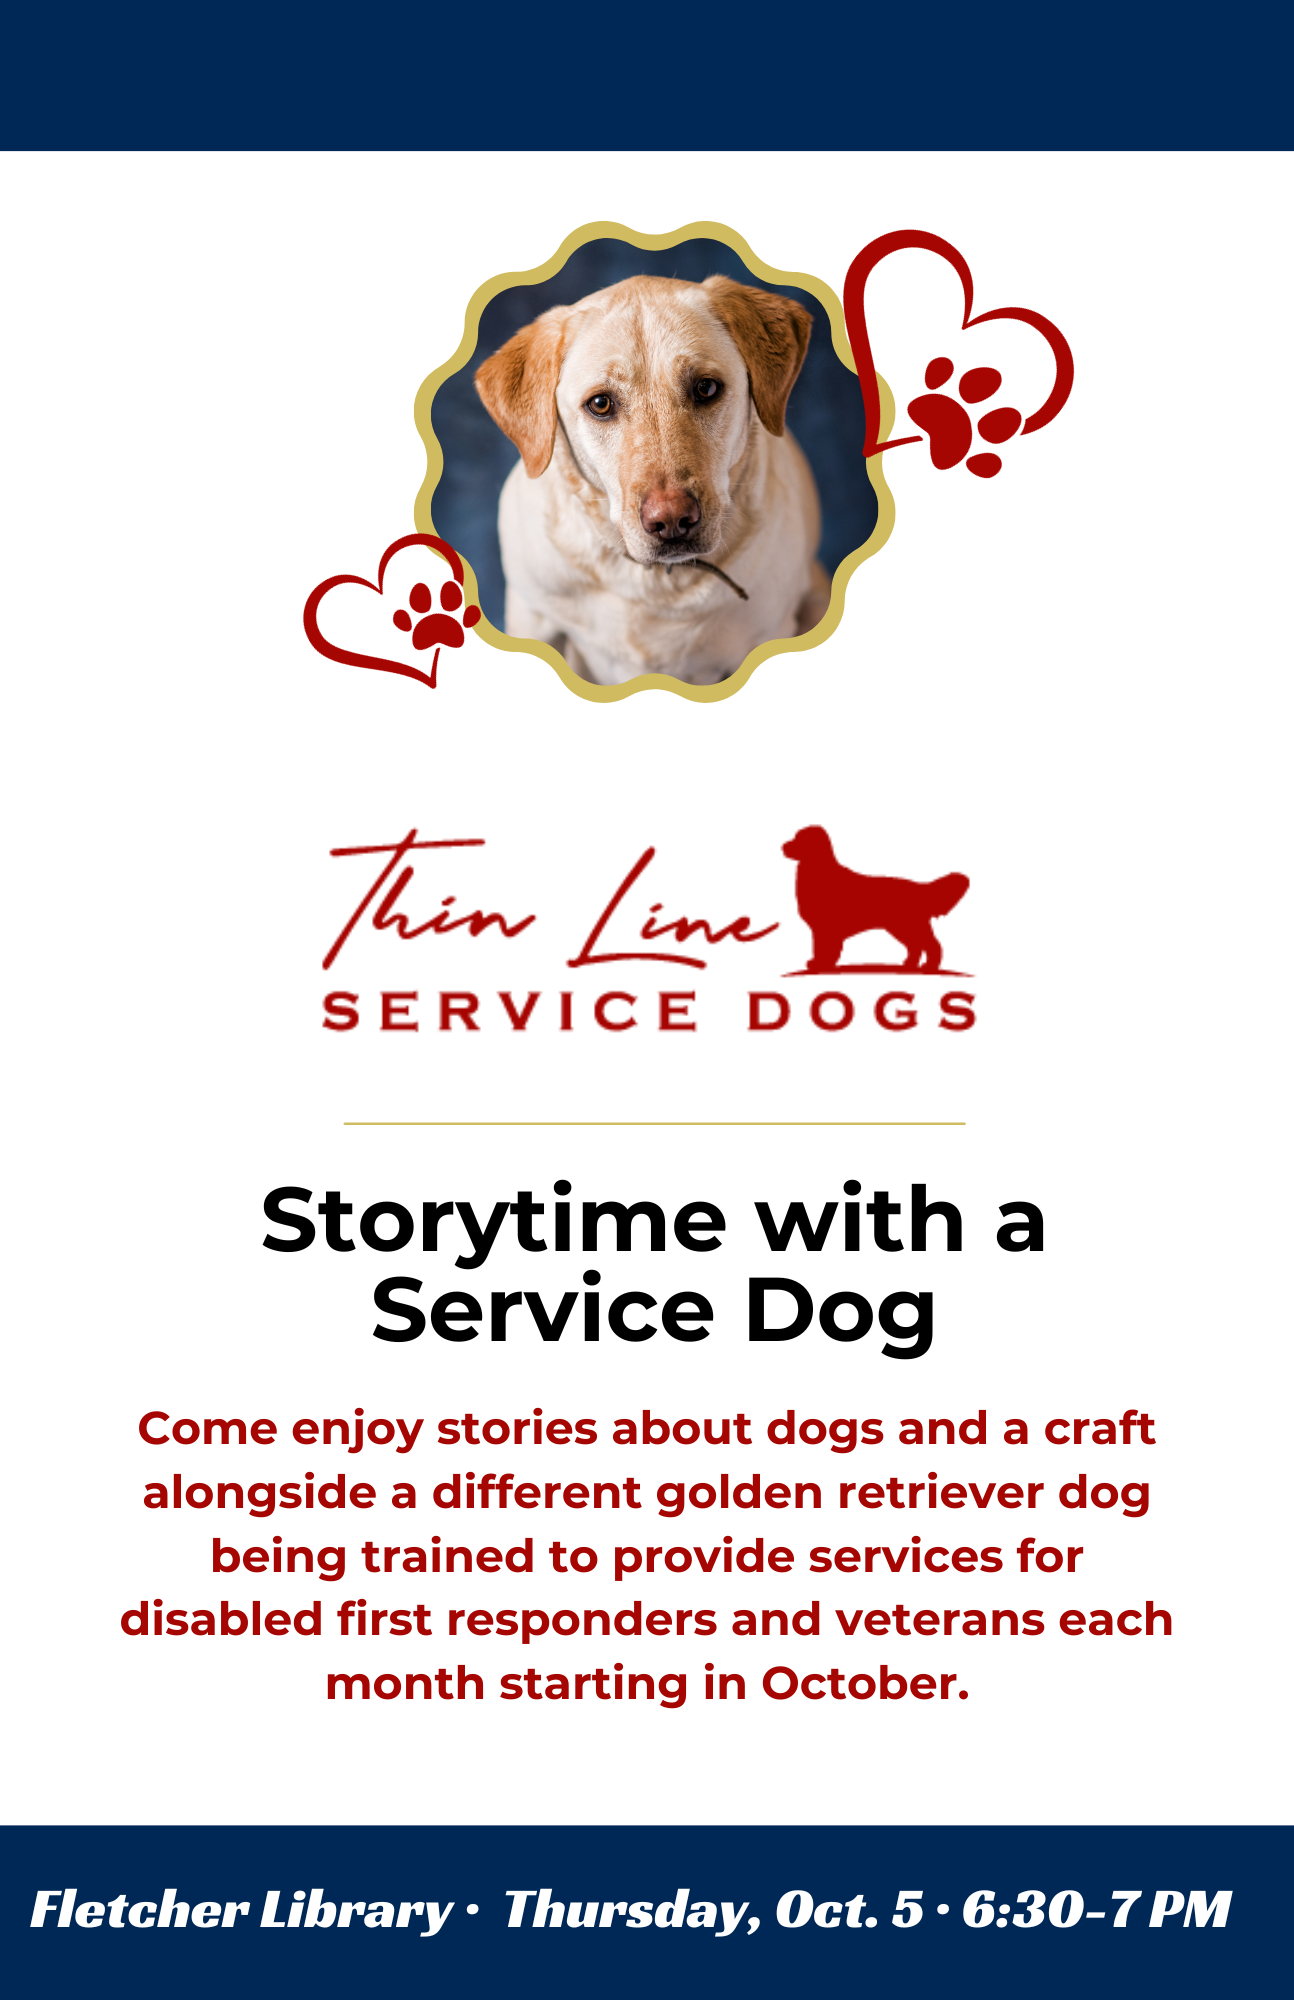 golden retriever with storytime info